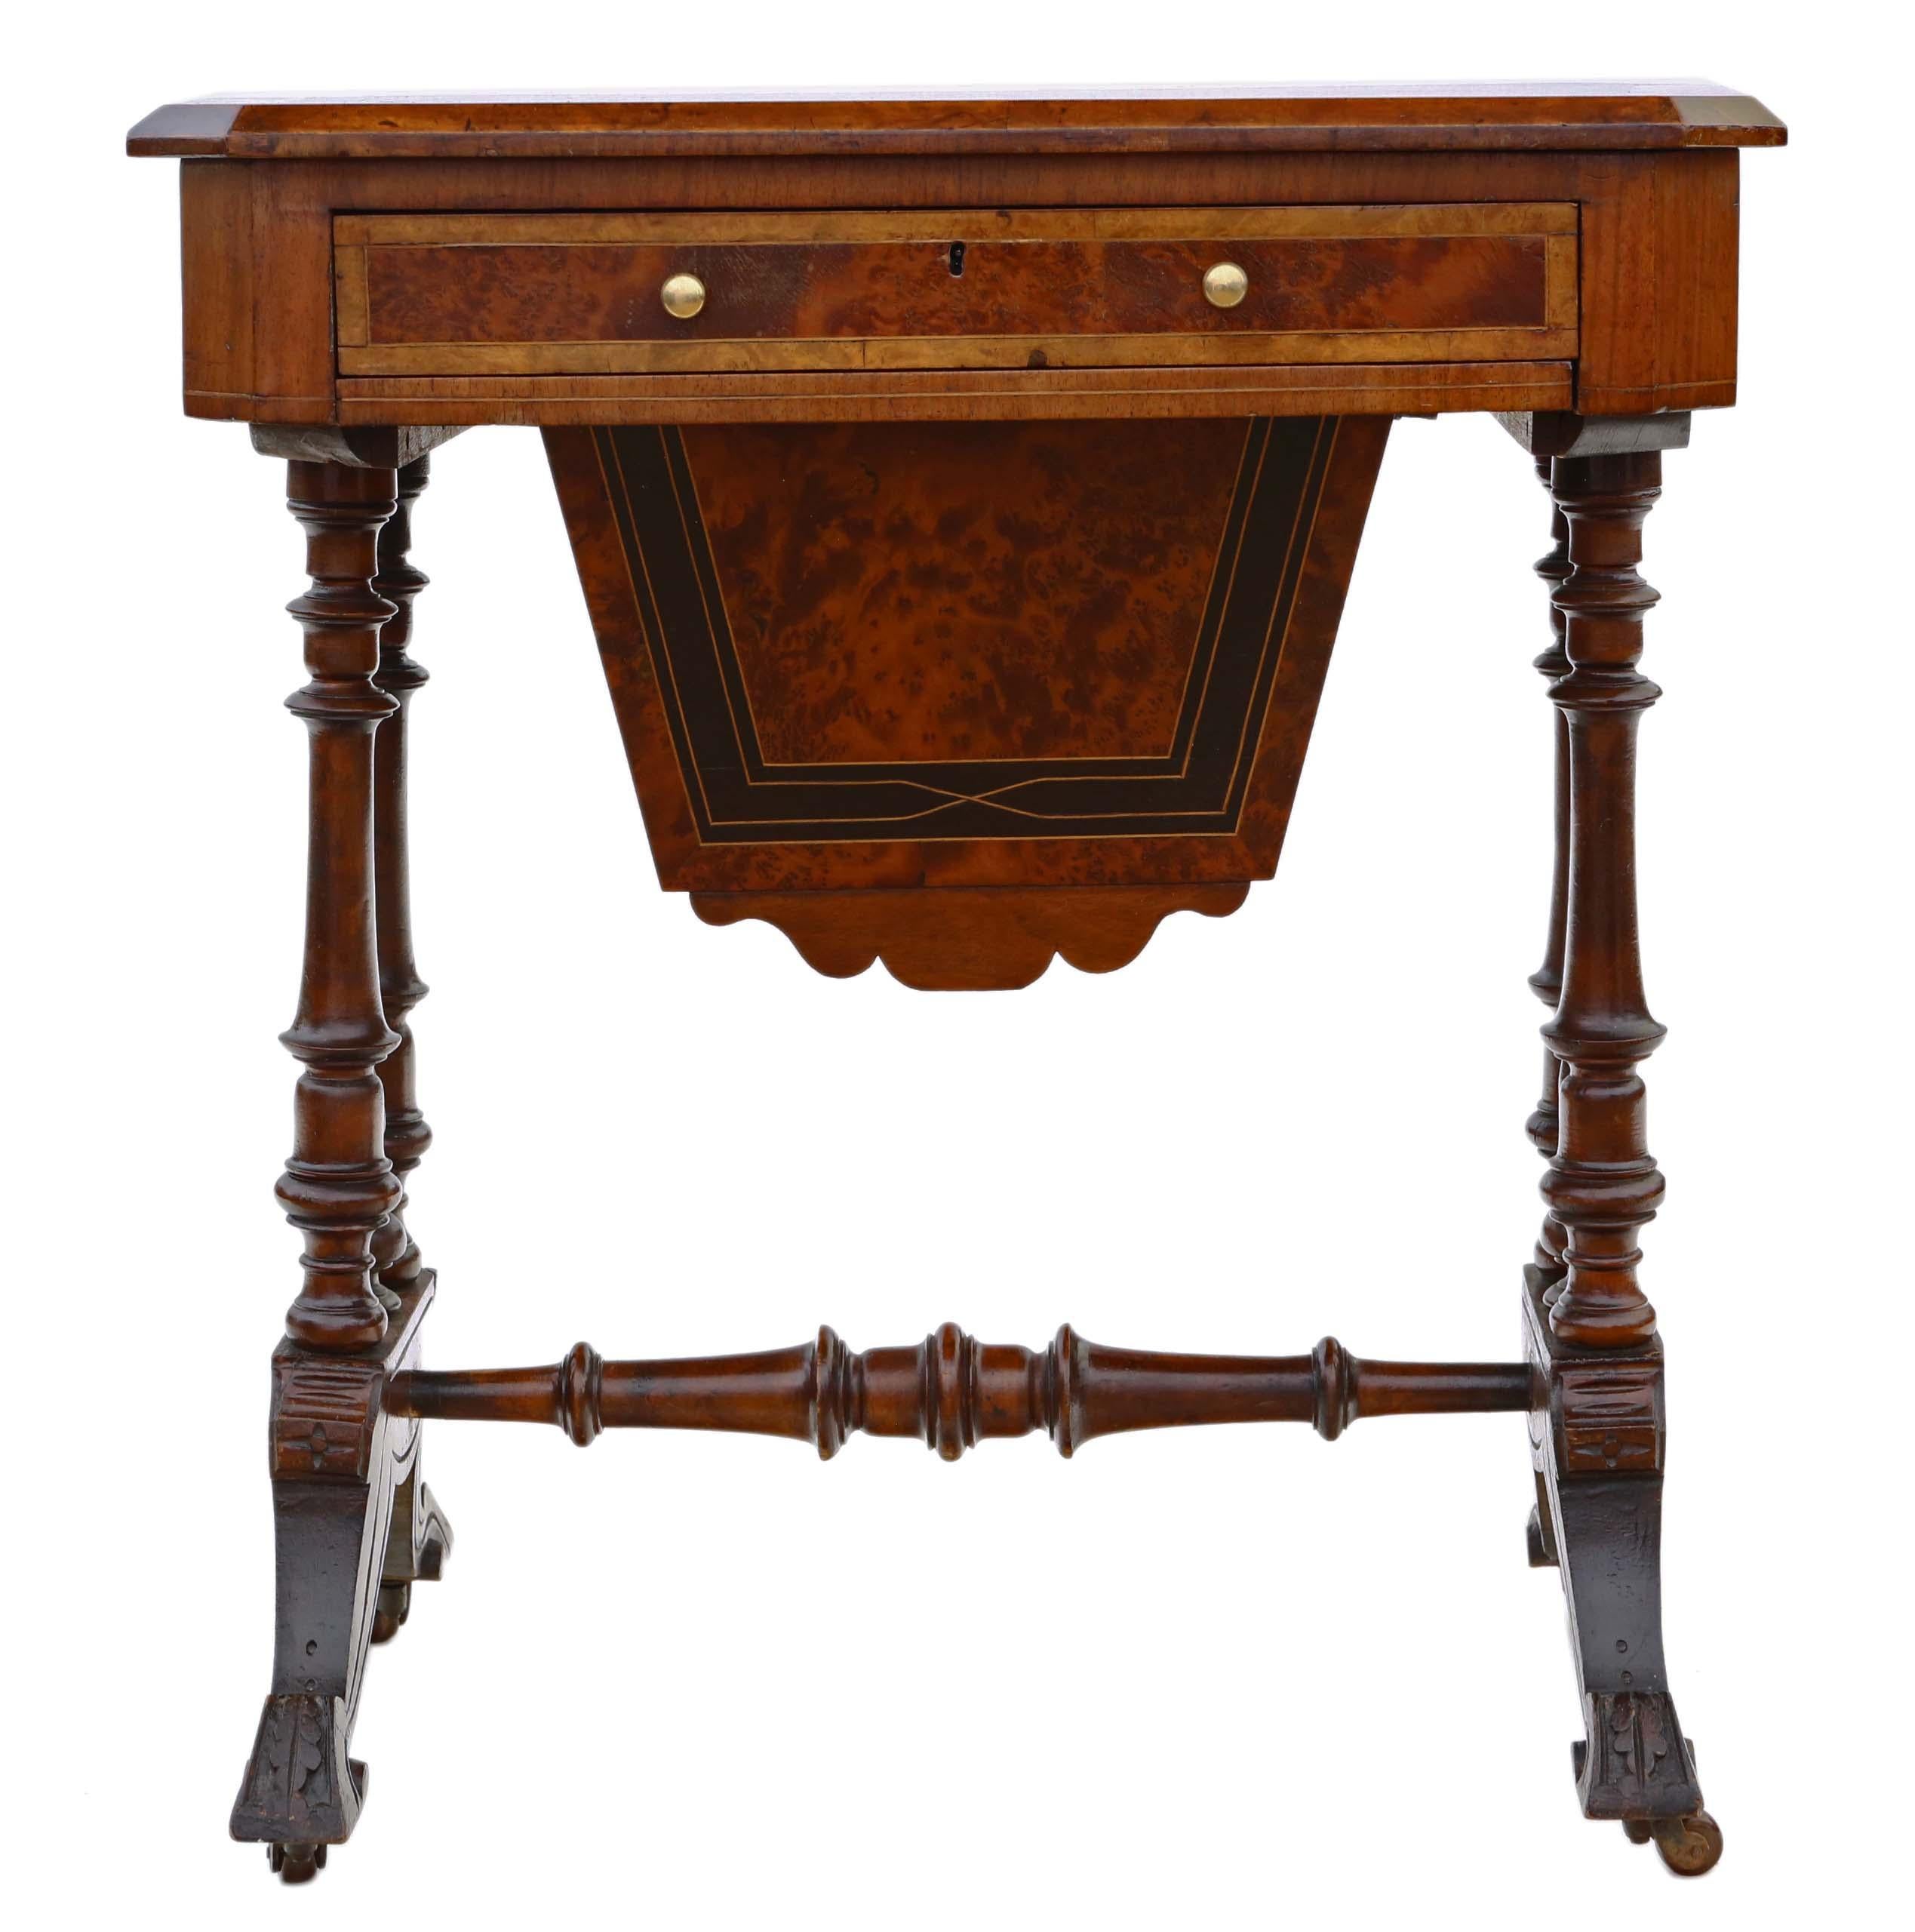 Antique fine quality Victorian C1880 inlaid burr walnut and amboyna work side sewing table box. 19th Century Aesthetic period styling.

This is a lovely item, that is full of age, charm and character. The mahogany lined drawers slide freely.

An